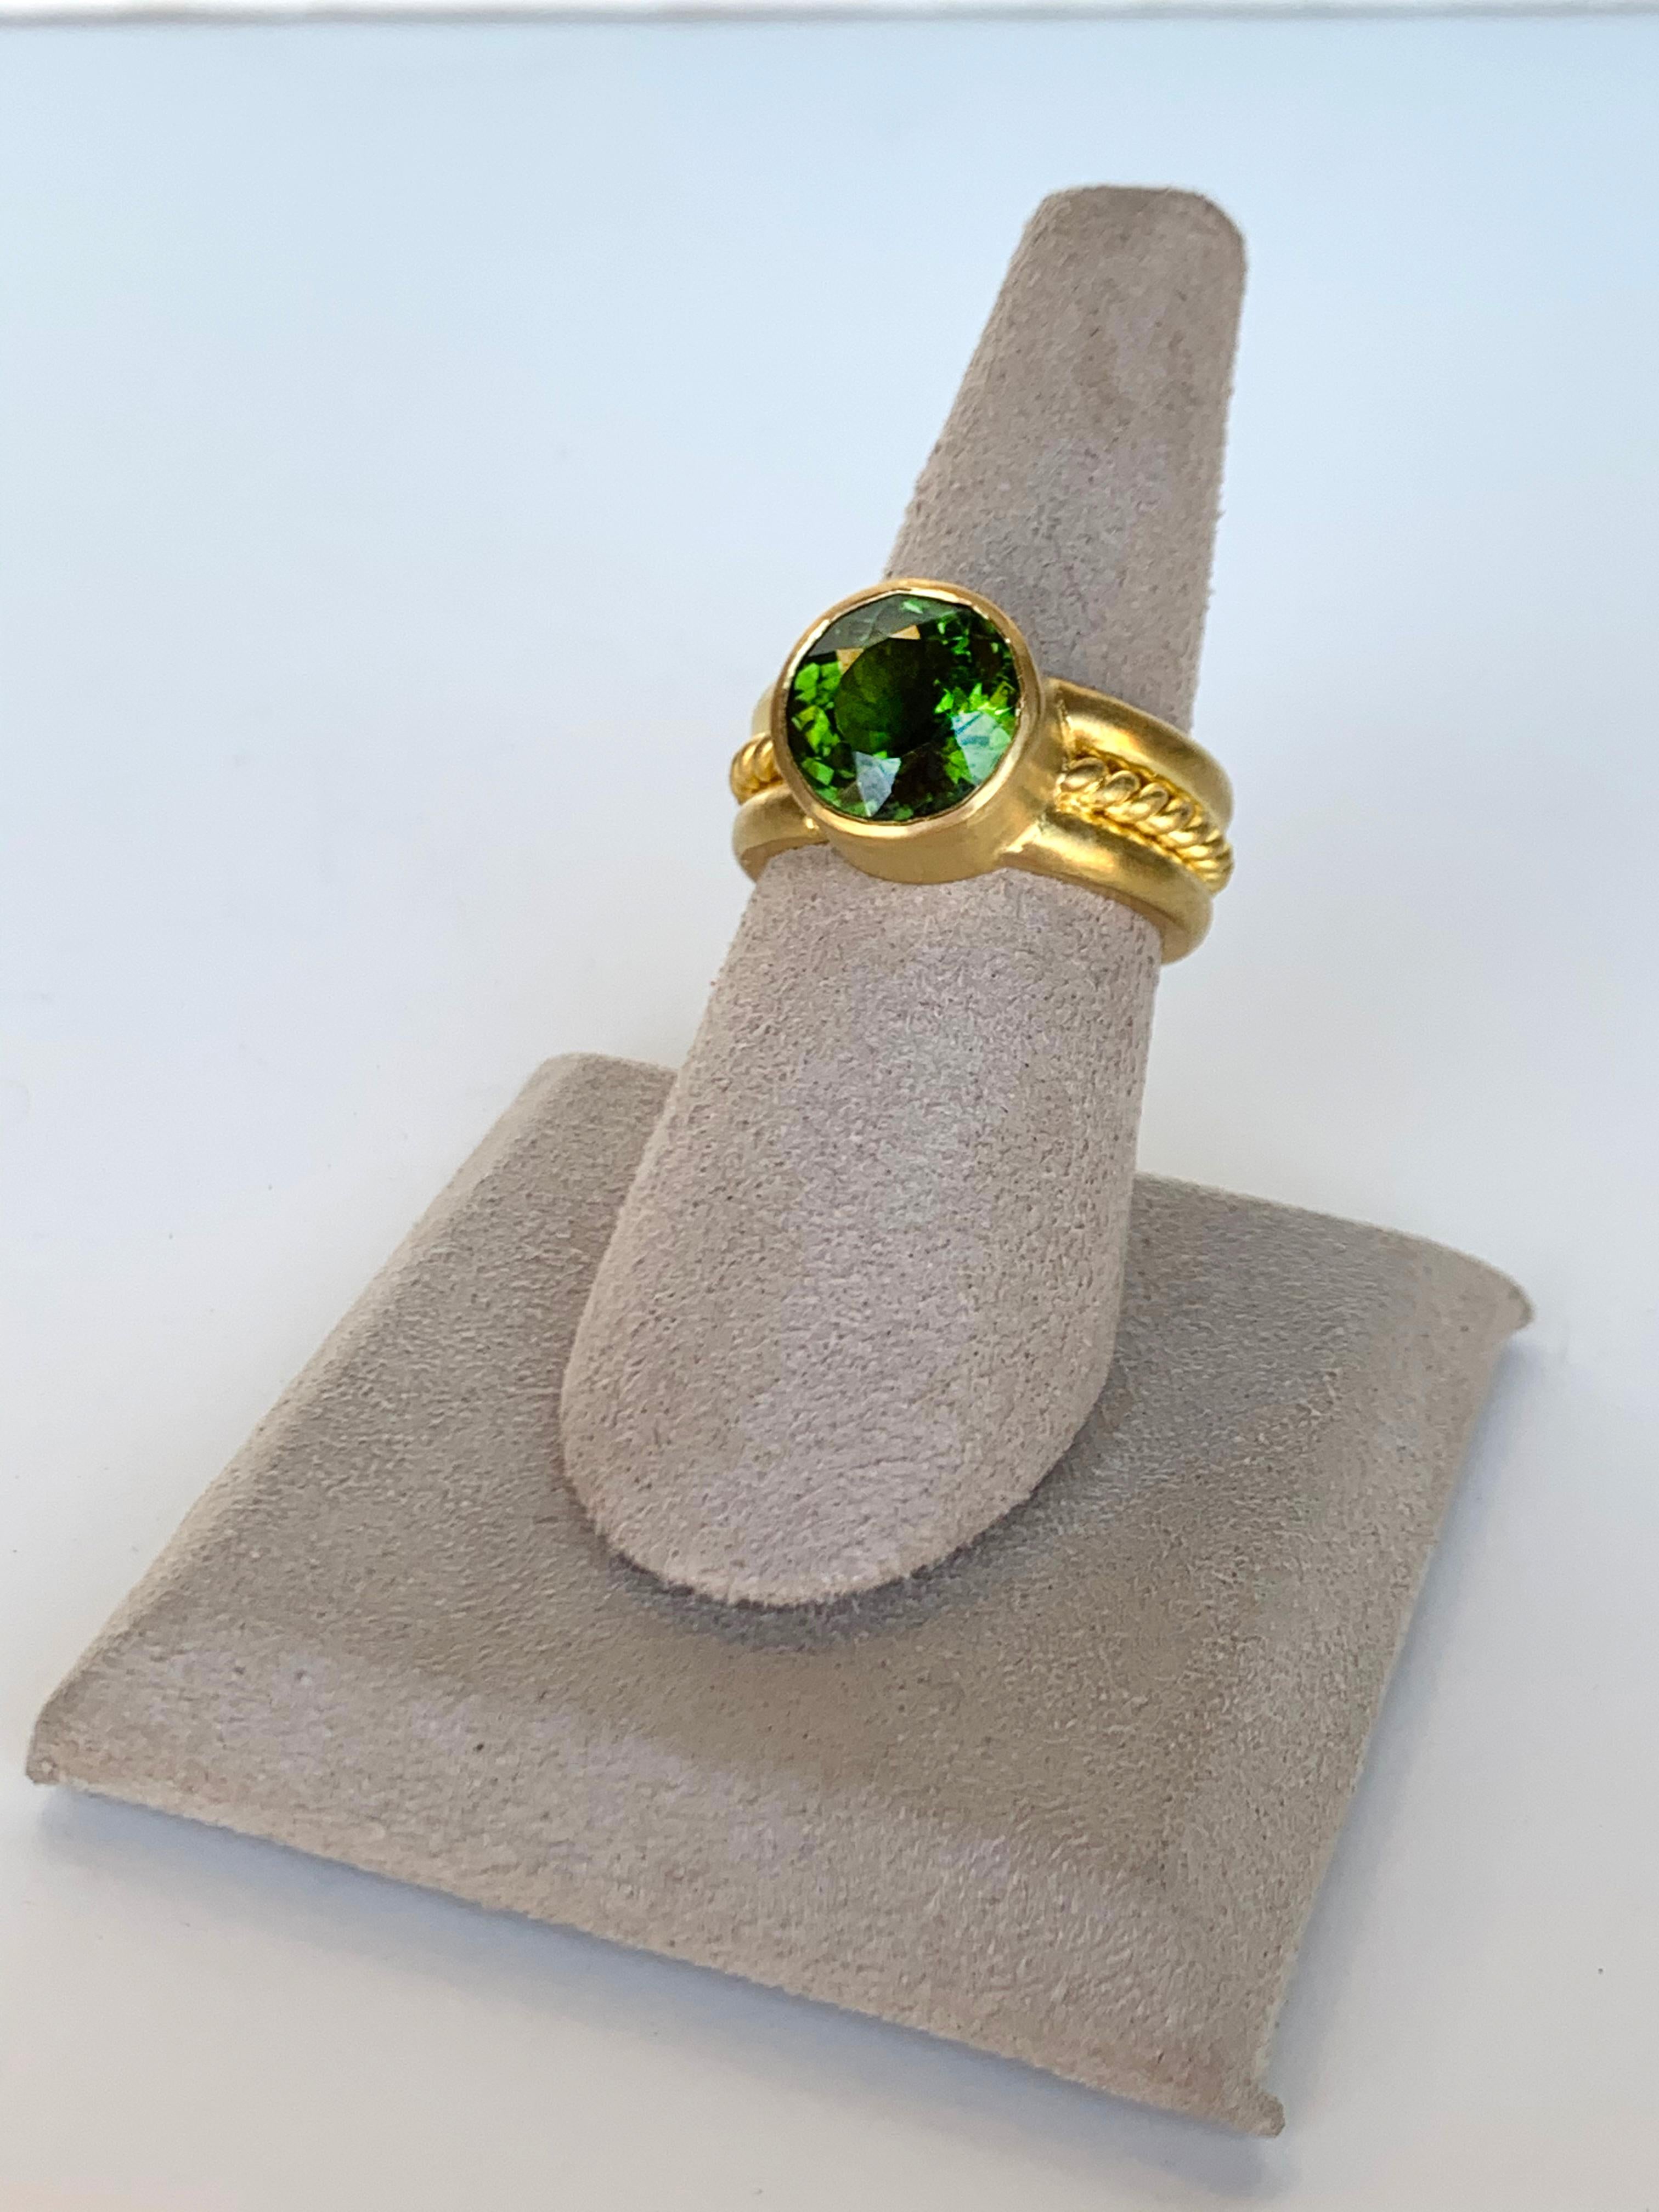 Inspired by ancient jewelry design, this vibrant faceted 4.25 carat green tourmaline is set in a 22 karat gold bezel. Thick 22 karat gold wire twists around the band. Entirely crafted by hand in New York.  Size 6.75.

